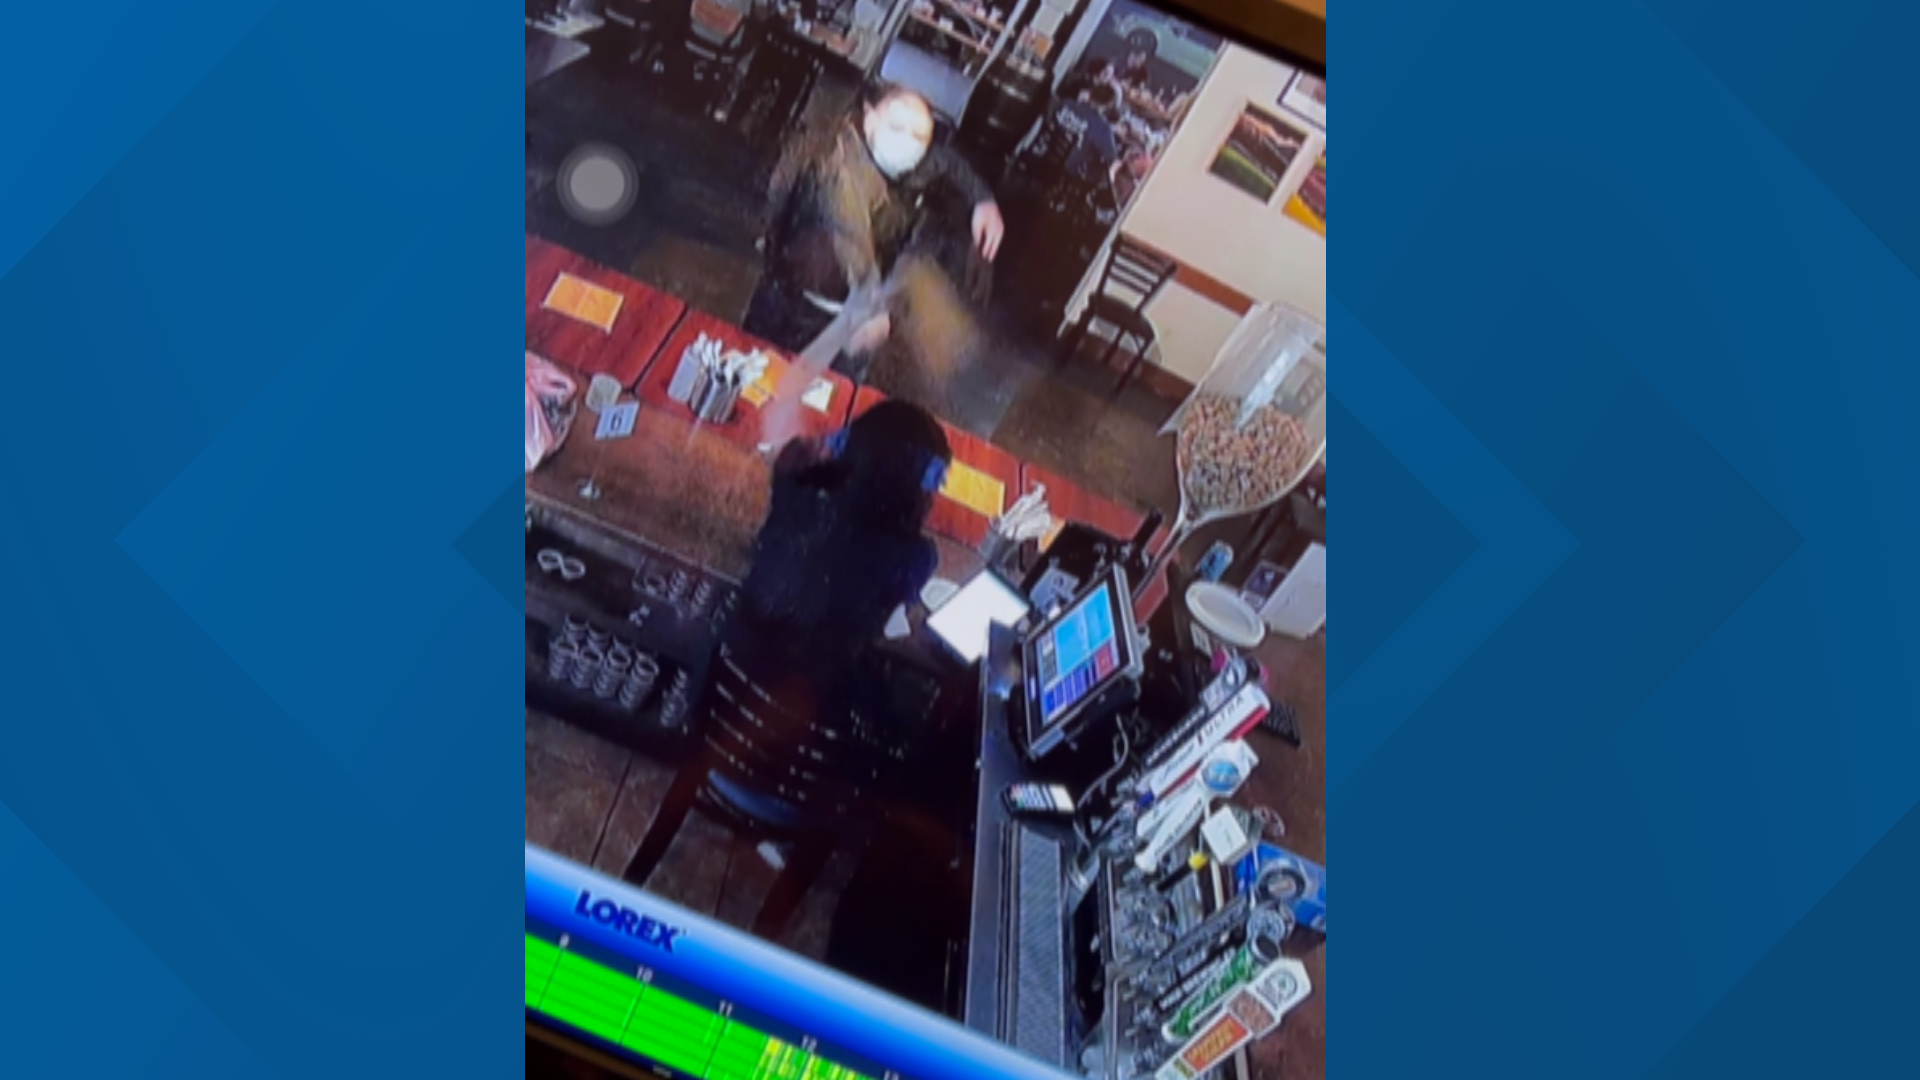 Sacramento Police are investigating an incident report of a customer throwing an item at a Sacramento restaurant worker and fighting other customers.